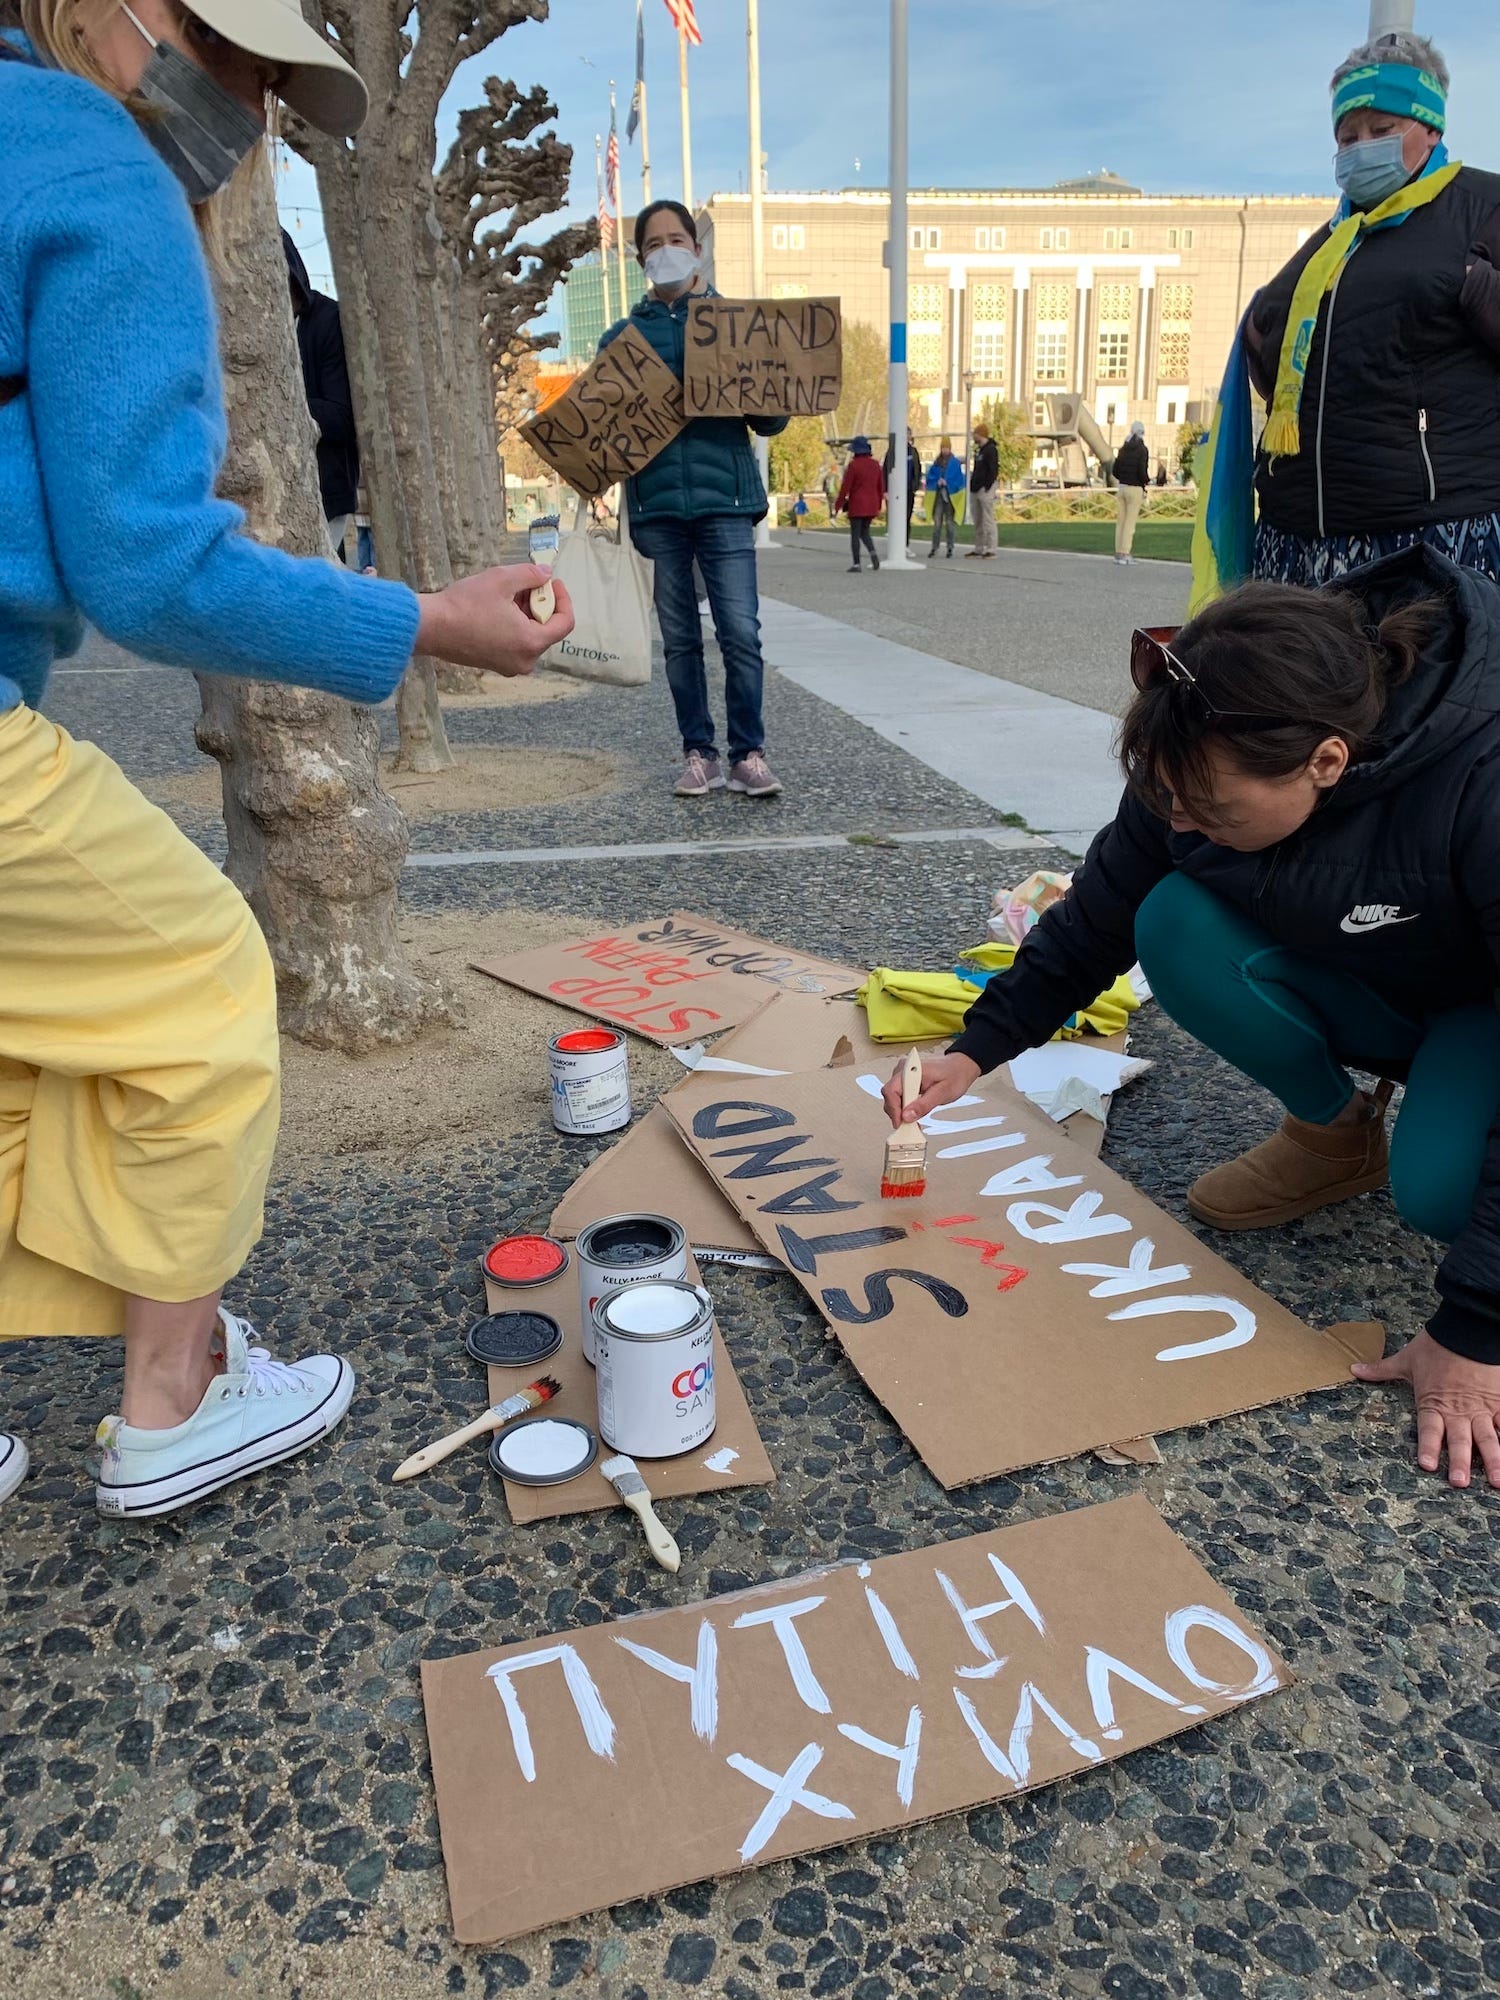 young woman paints "stand with ukraine" sign on cardboard on the ground